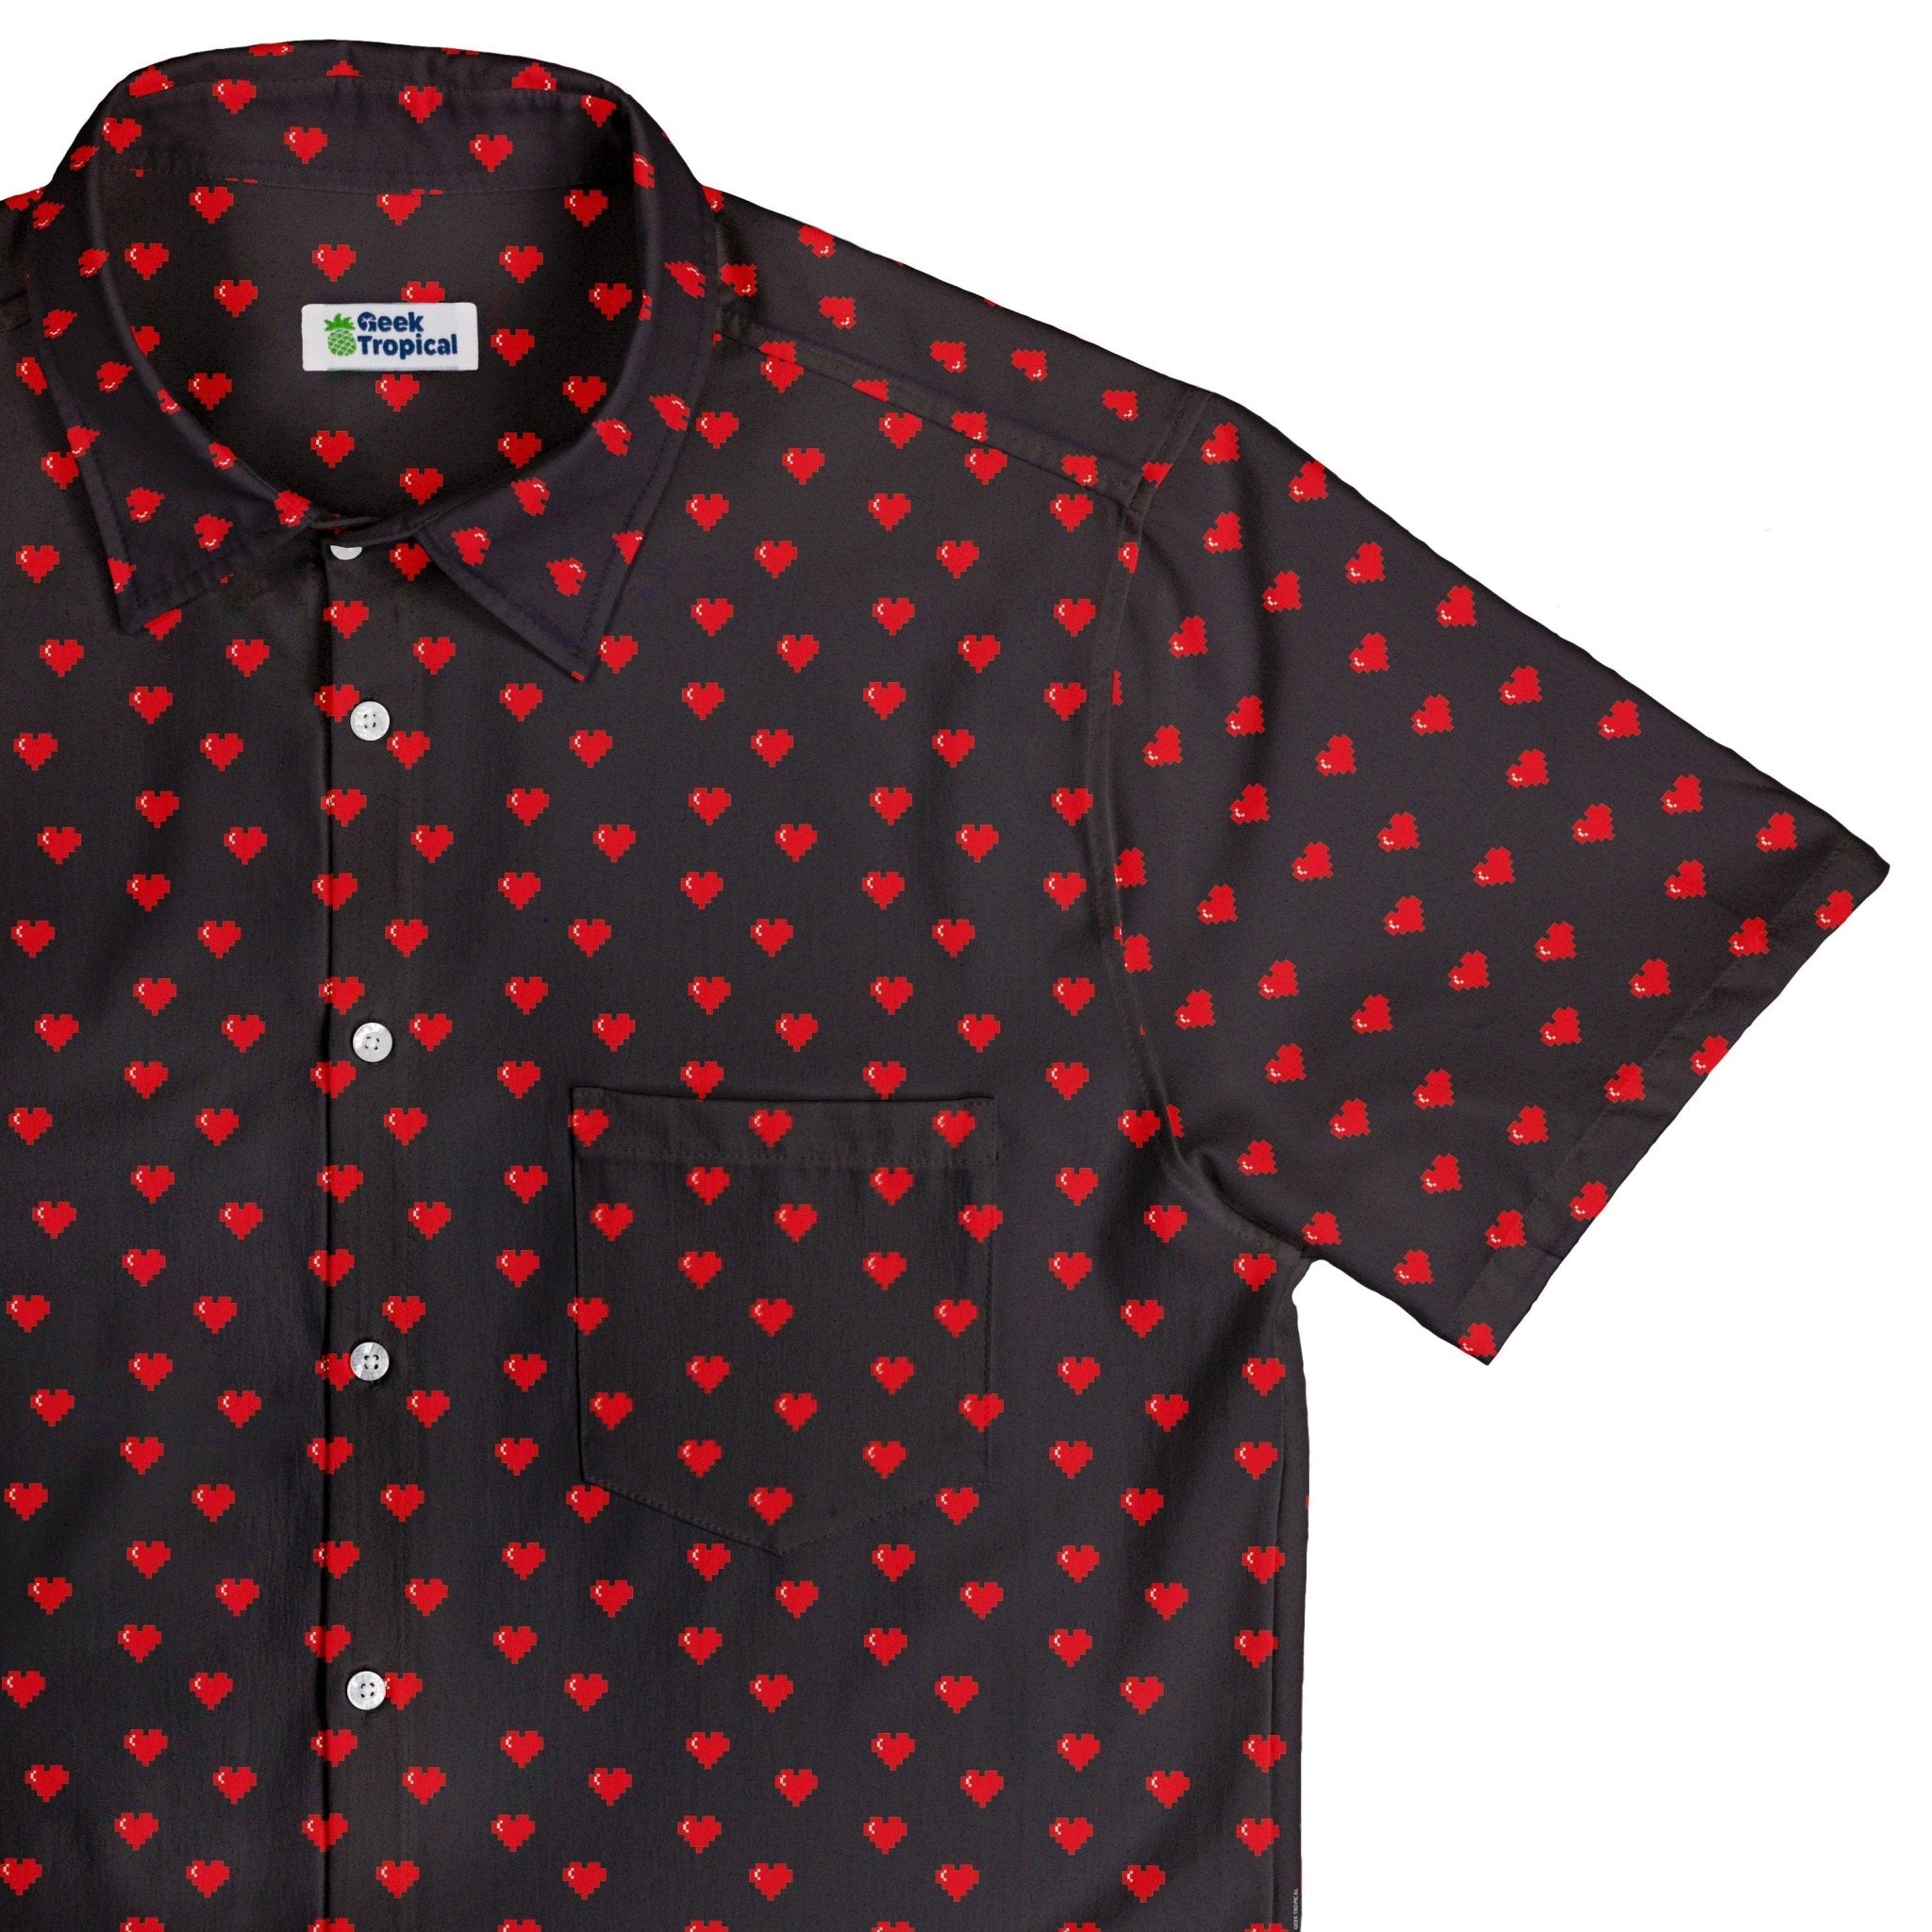 Video Game Hearts Black Button Up Shirt - adult sizing - Design by Heather Davenport - Simple Patterns